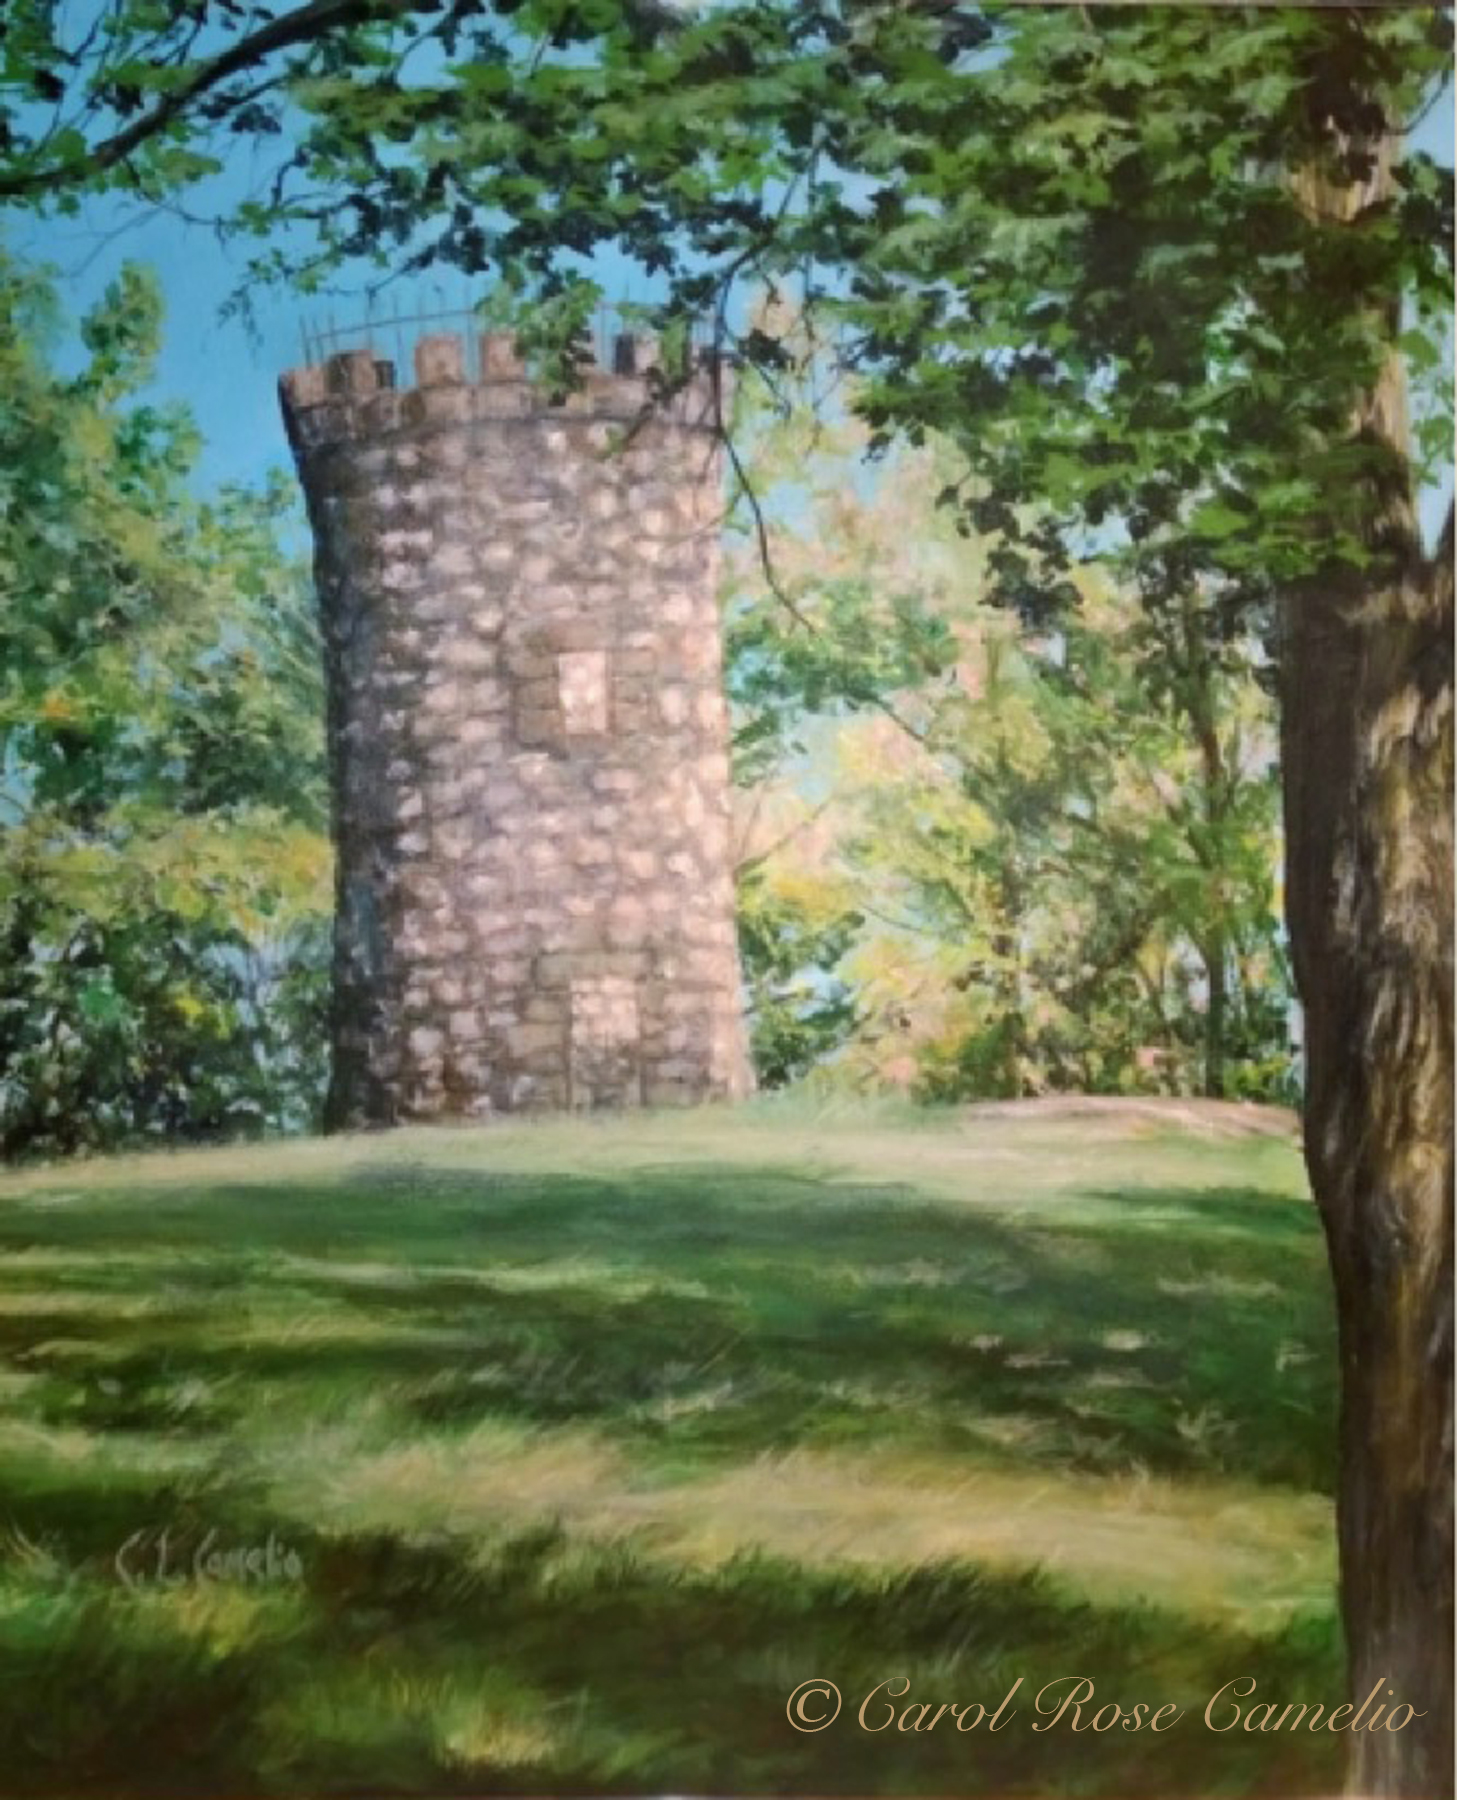 The Tower: A short stone tower on a grassy, wooded hill.